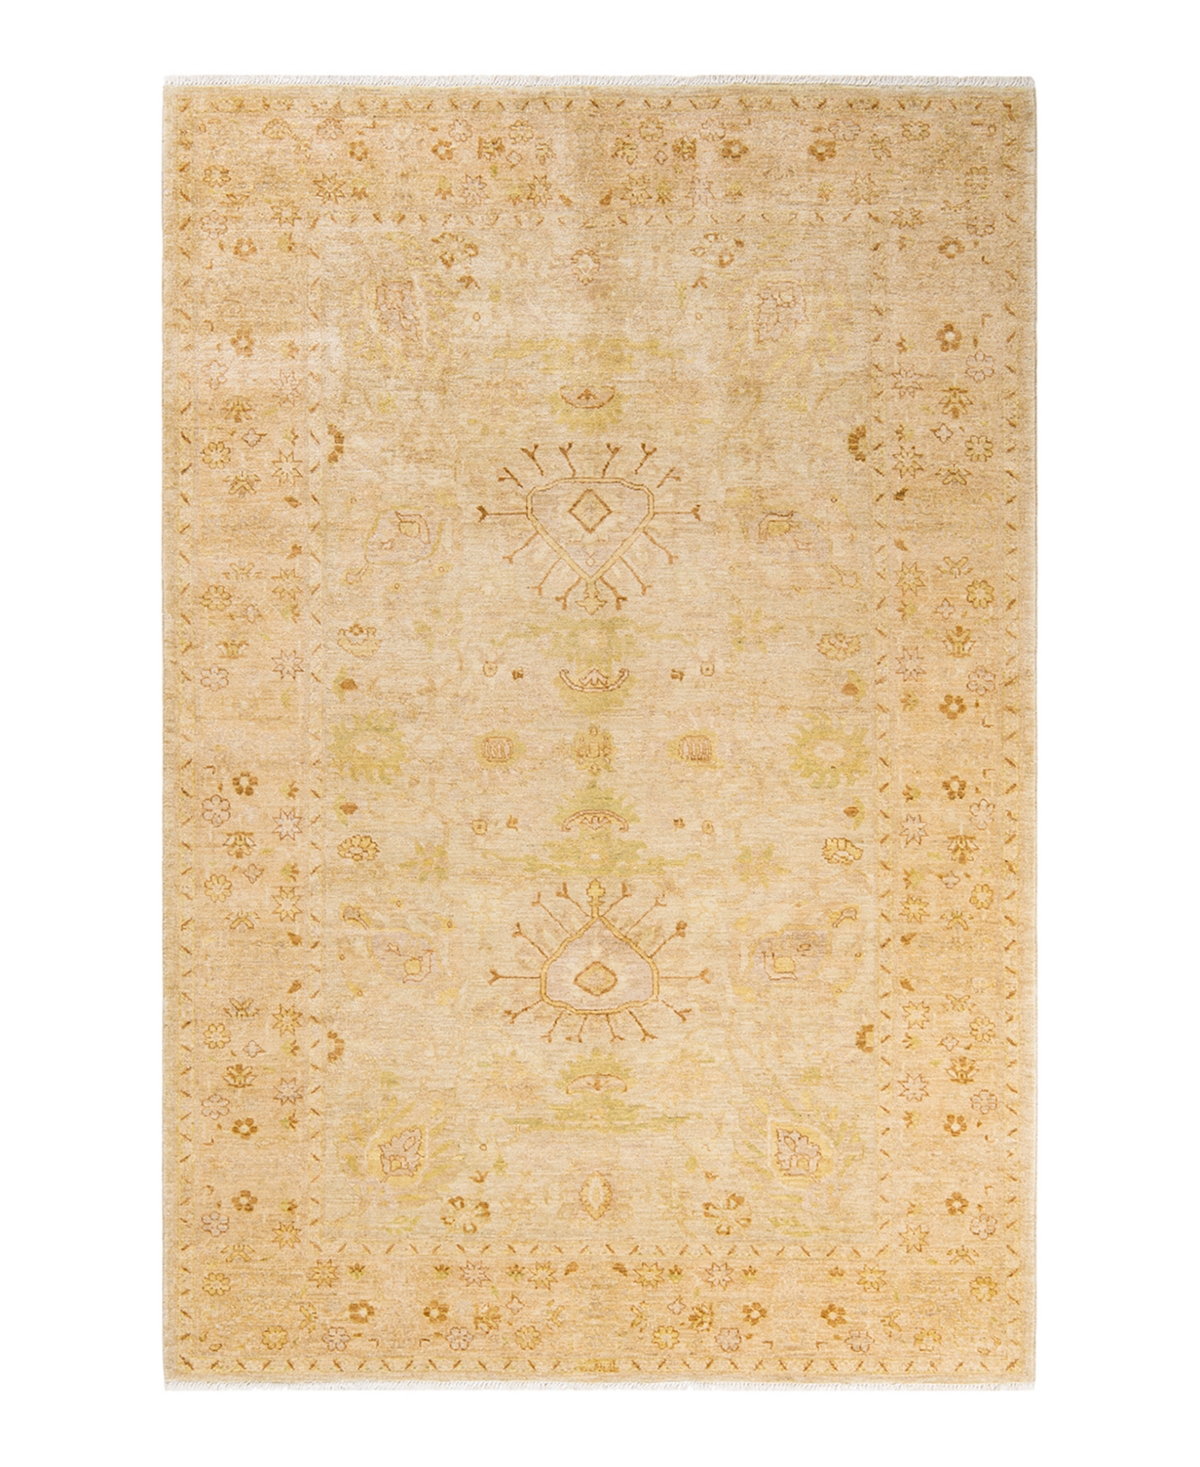 Closeout! Adorn Hand Woven Rugs Eclectic M1466 6'3in x 9'6in Area Rug - Ivory